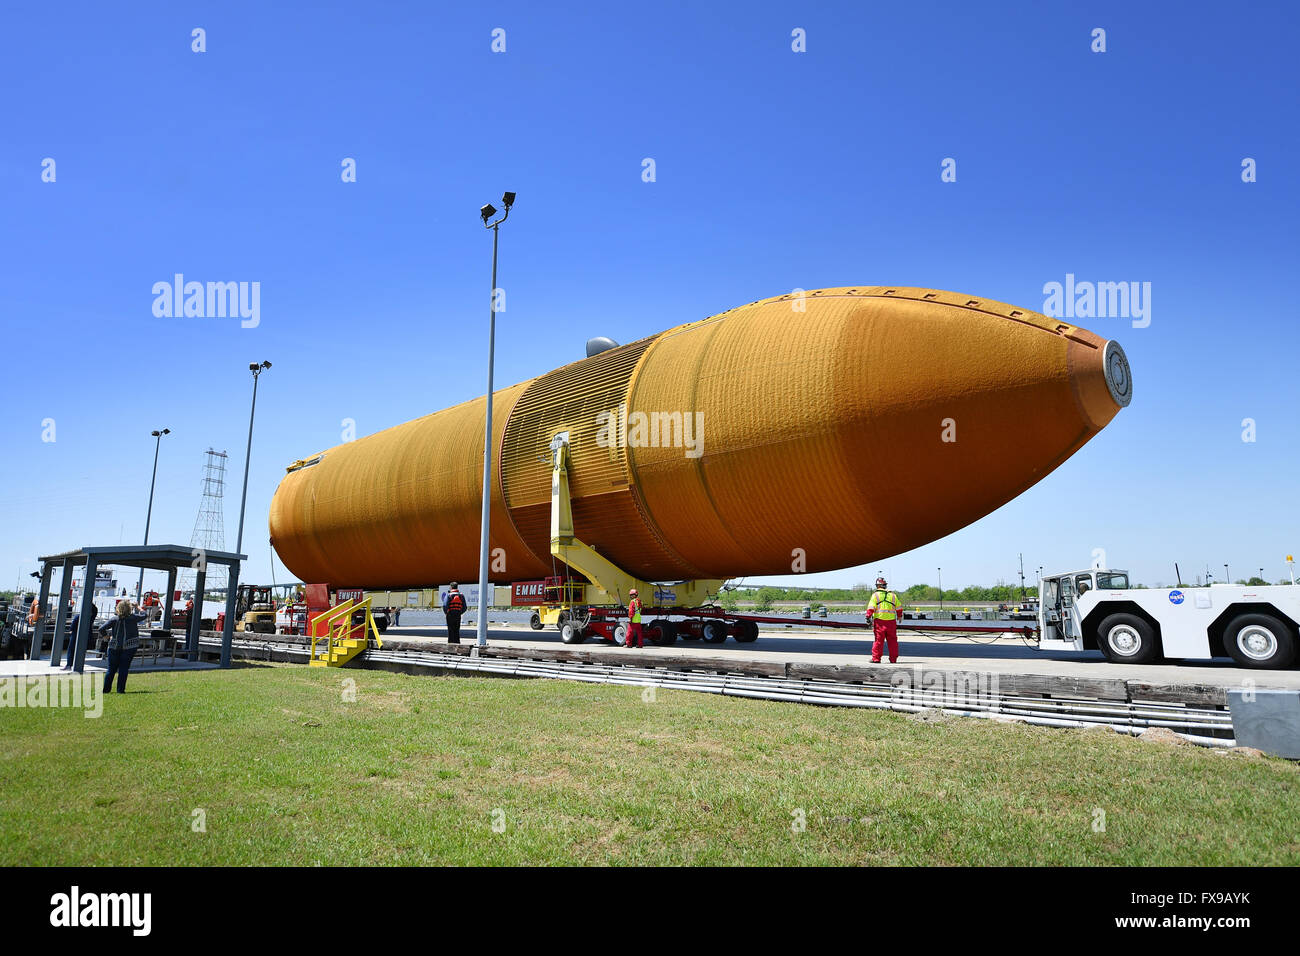 New Orleans, Louisiana, USA. 12th April, 2016. The last Space Shuttle external fuel tank begins a long journey to the California Science Center as it is moved to a barge at the Michoud Assembly Facility April 12, 2016 in New Orleans, Louisiana. The massive 154 feet long, 69,000 pound structure once fed liquid oxygen and liquid hydrogen to the space shuttle main engines and has been retired with the Shuttle program. Credit:  Planetpix/Alamy Live News Stock Photo